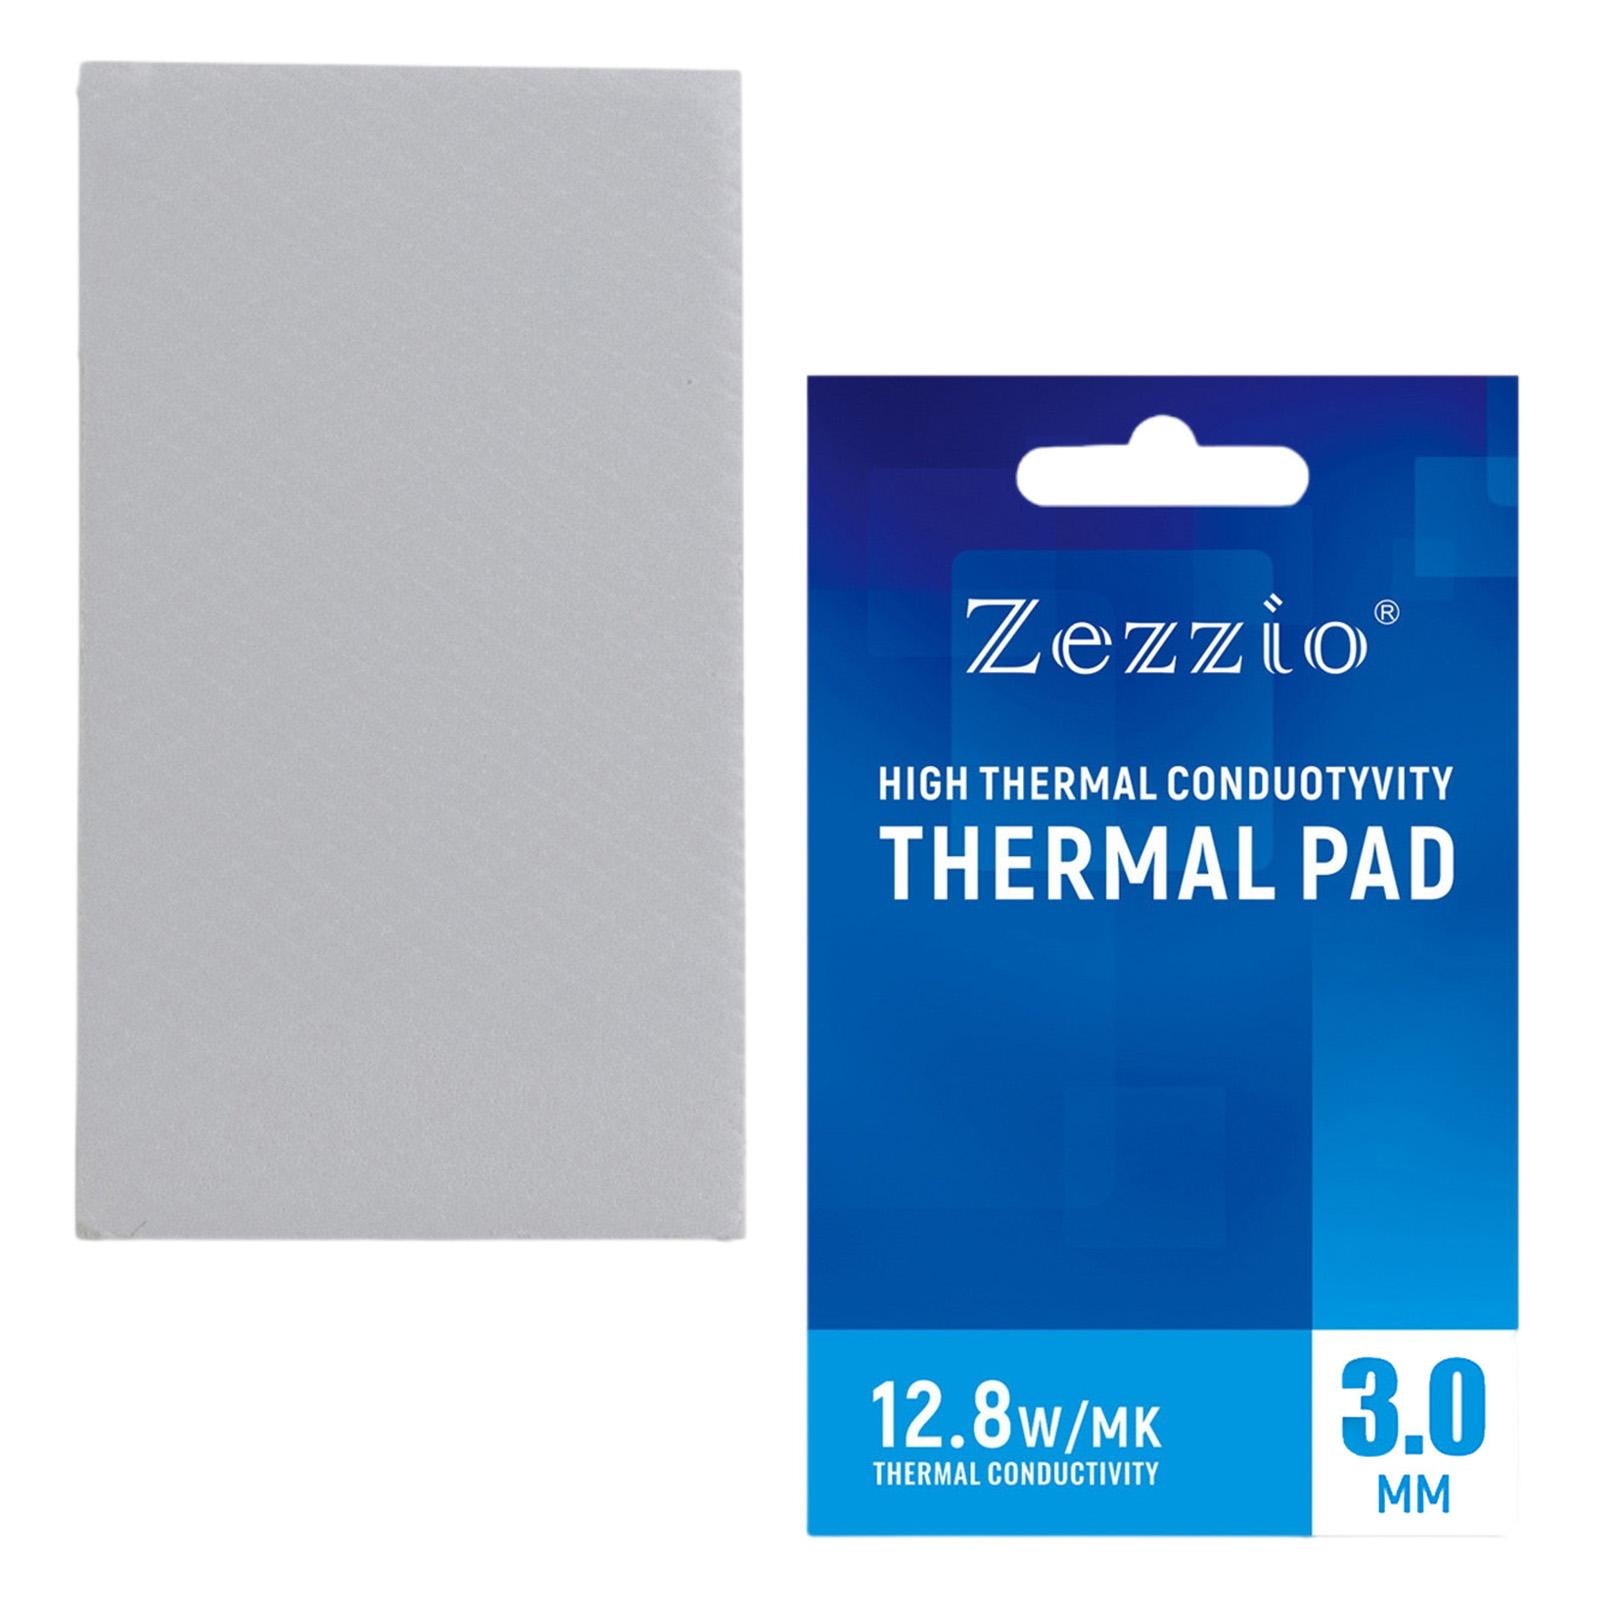 Silicone Thermal Pad 12.8 W/mK Heat Resistance Simple for PC Laptop Heatsink 3.0mm